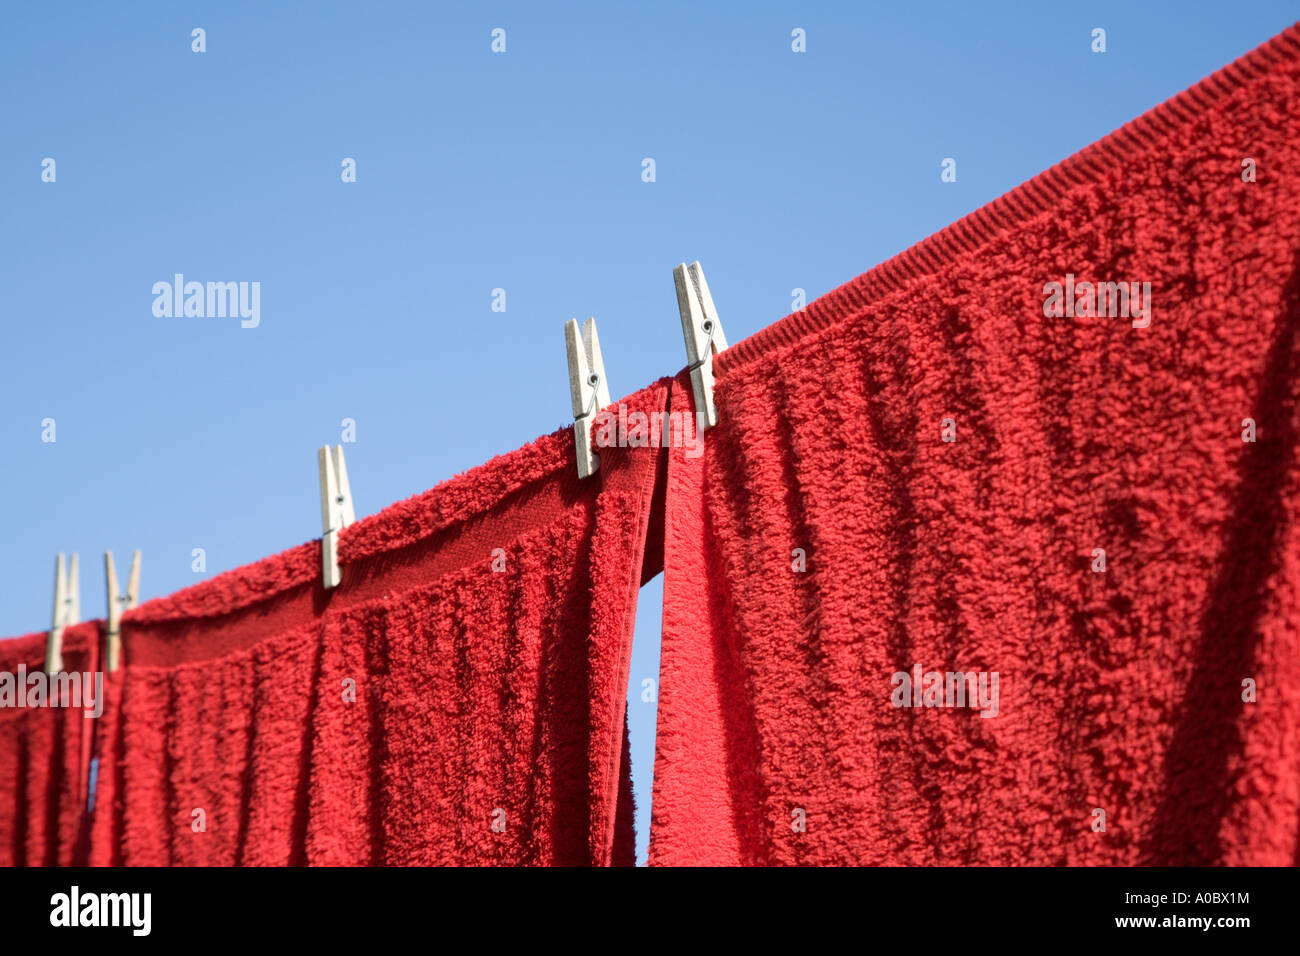 Red towels on a clothesline Stock Photo